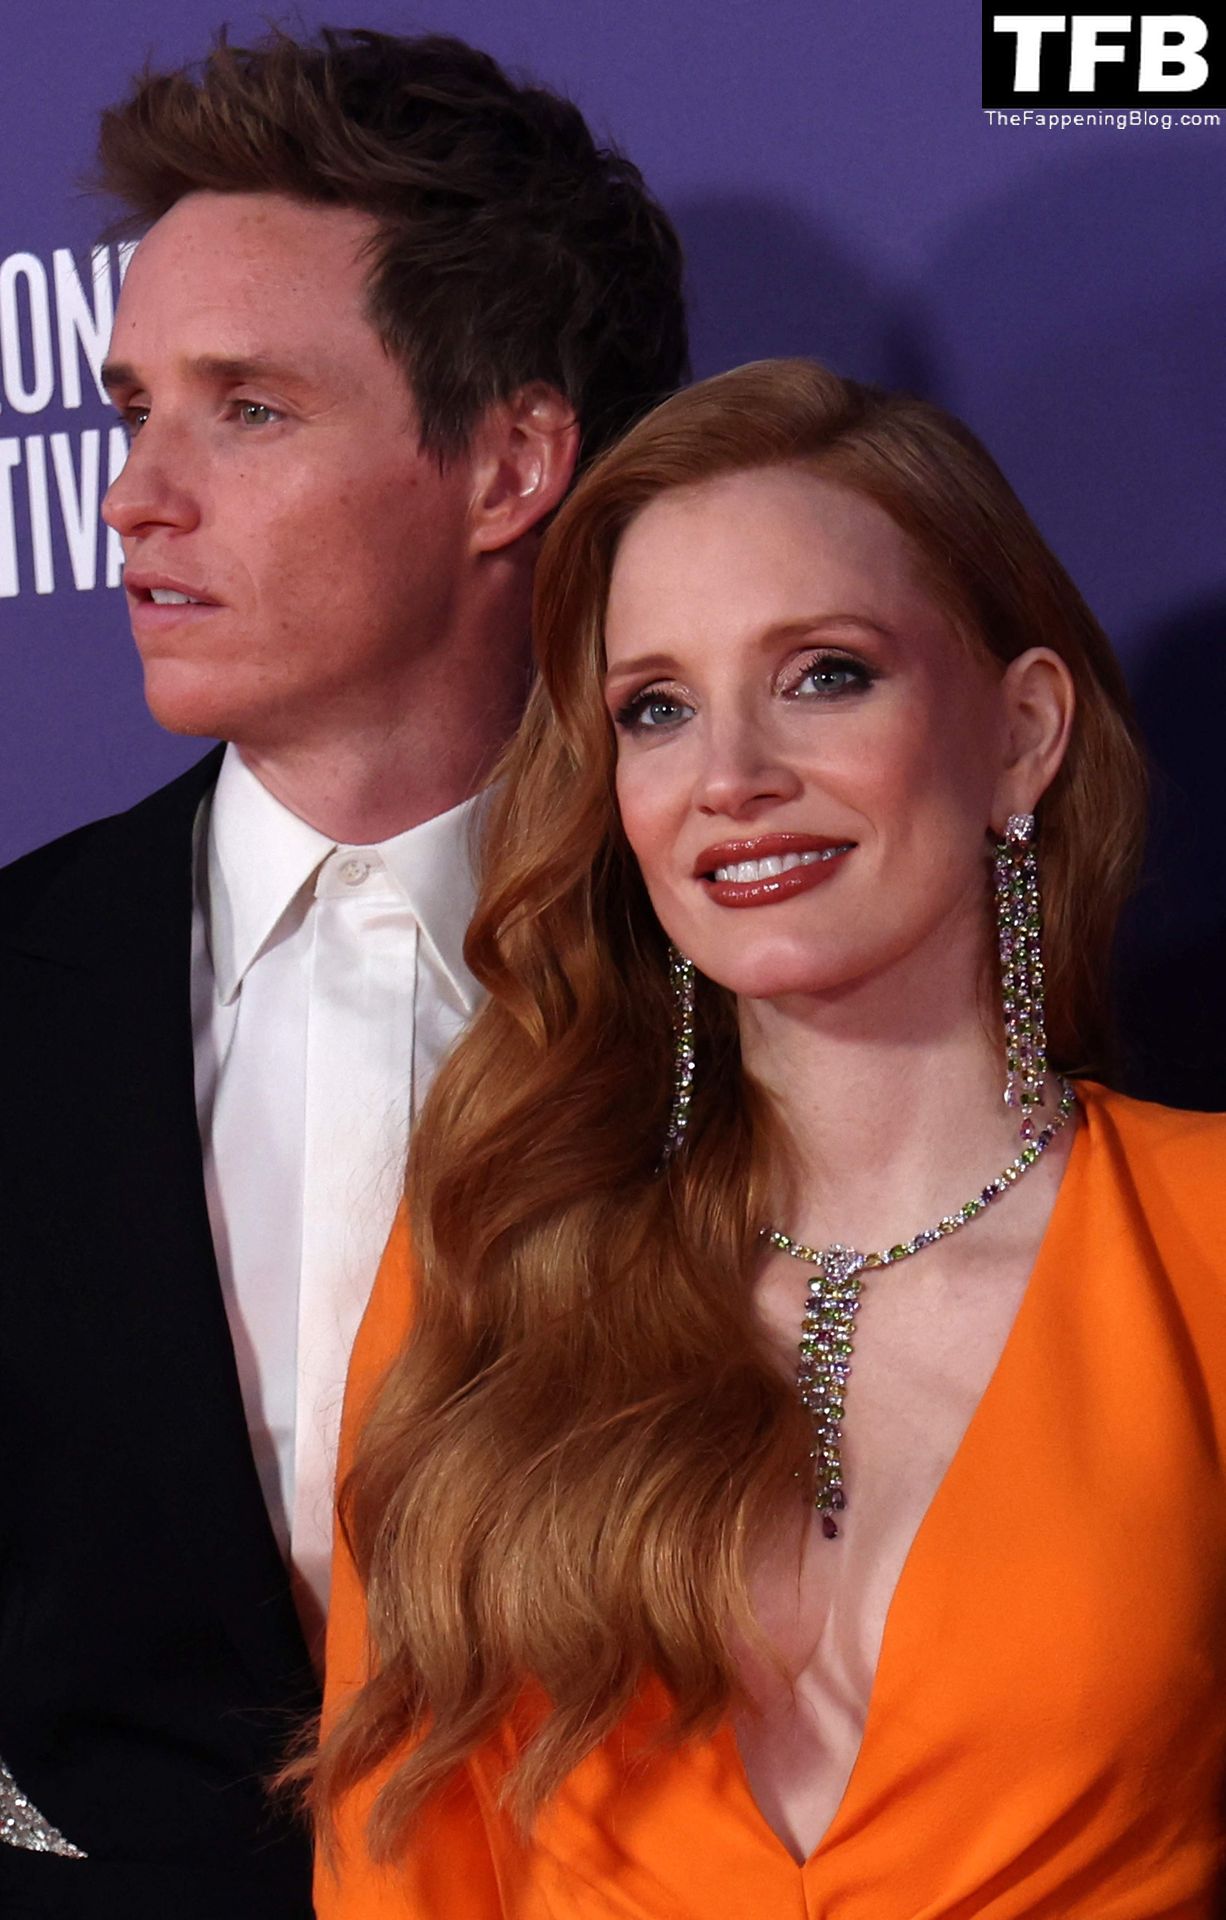 Jessica Chastain Sexy The Fappening Blog 47 - Jessica Chastain Poses for Photographers Upon Arrival for the Premiere of the Film “The Good Nurse” in London (150 Photos)